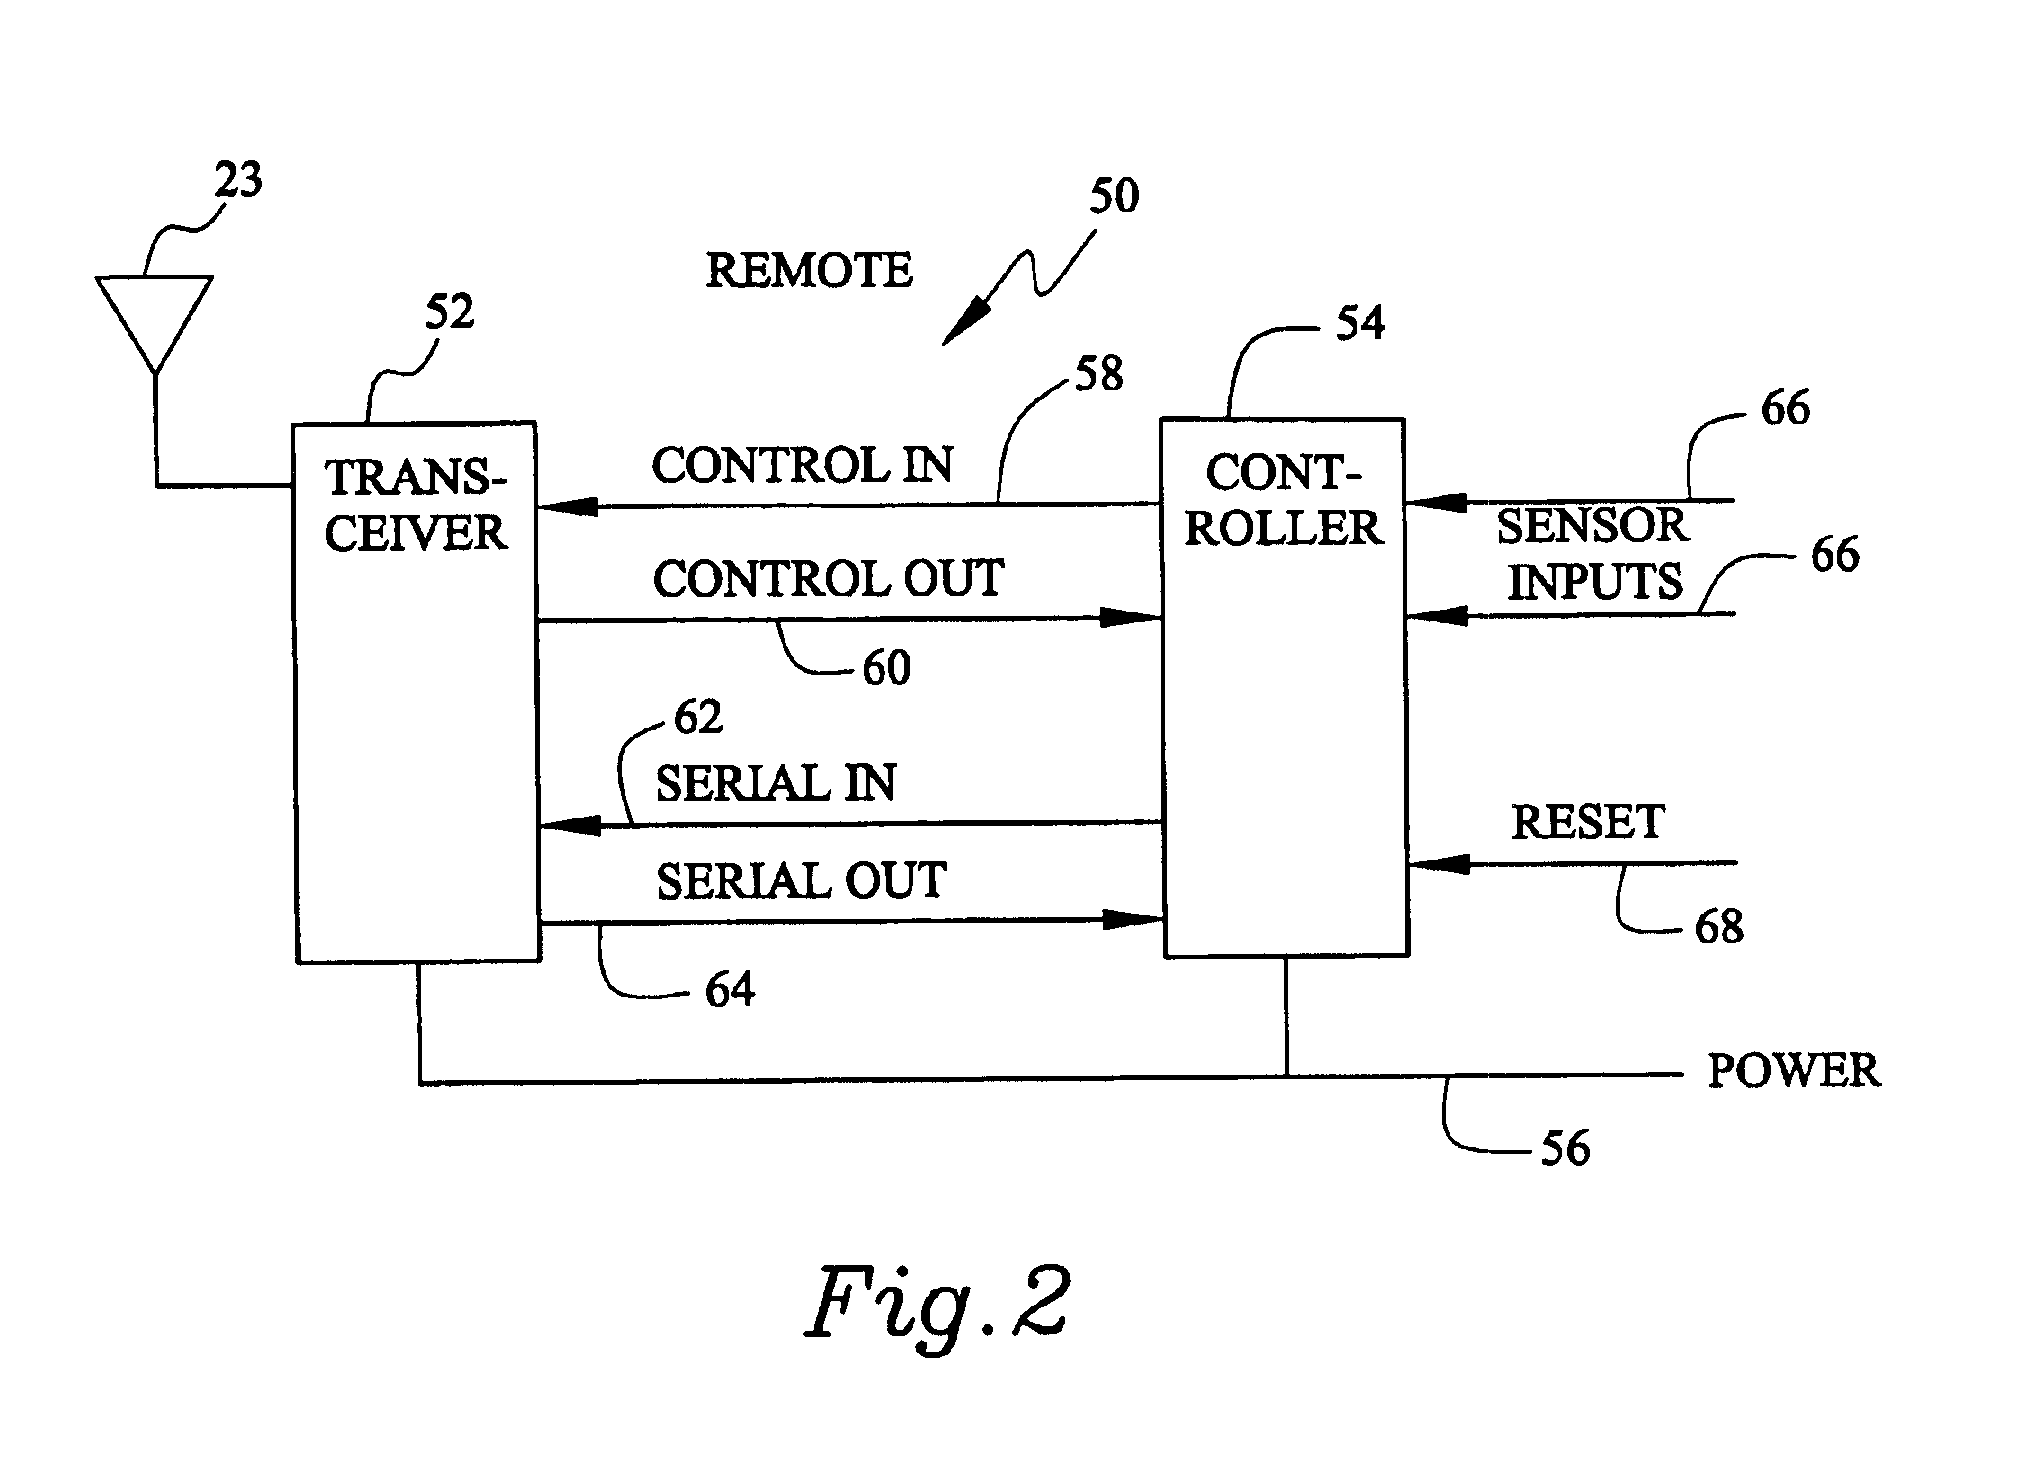 Wireless control network with scheduled time slots